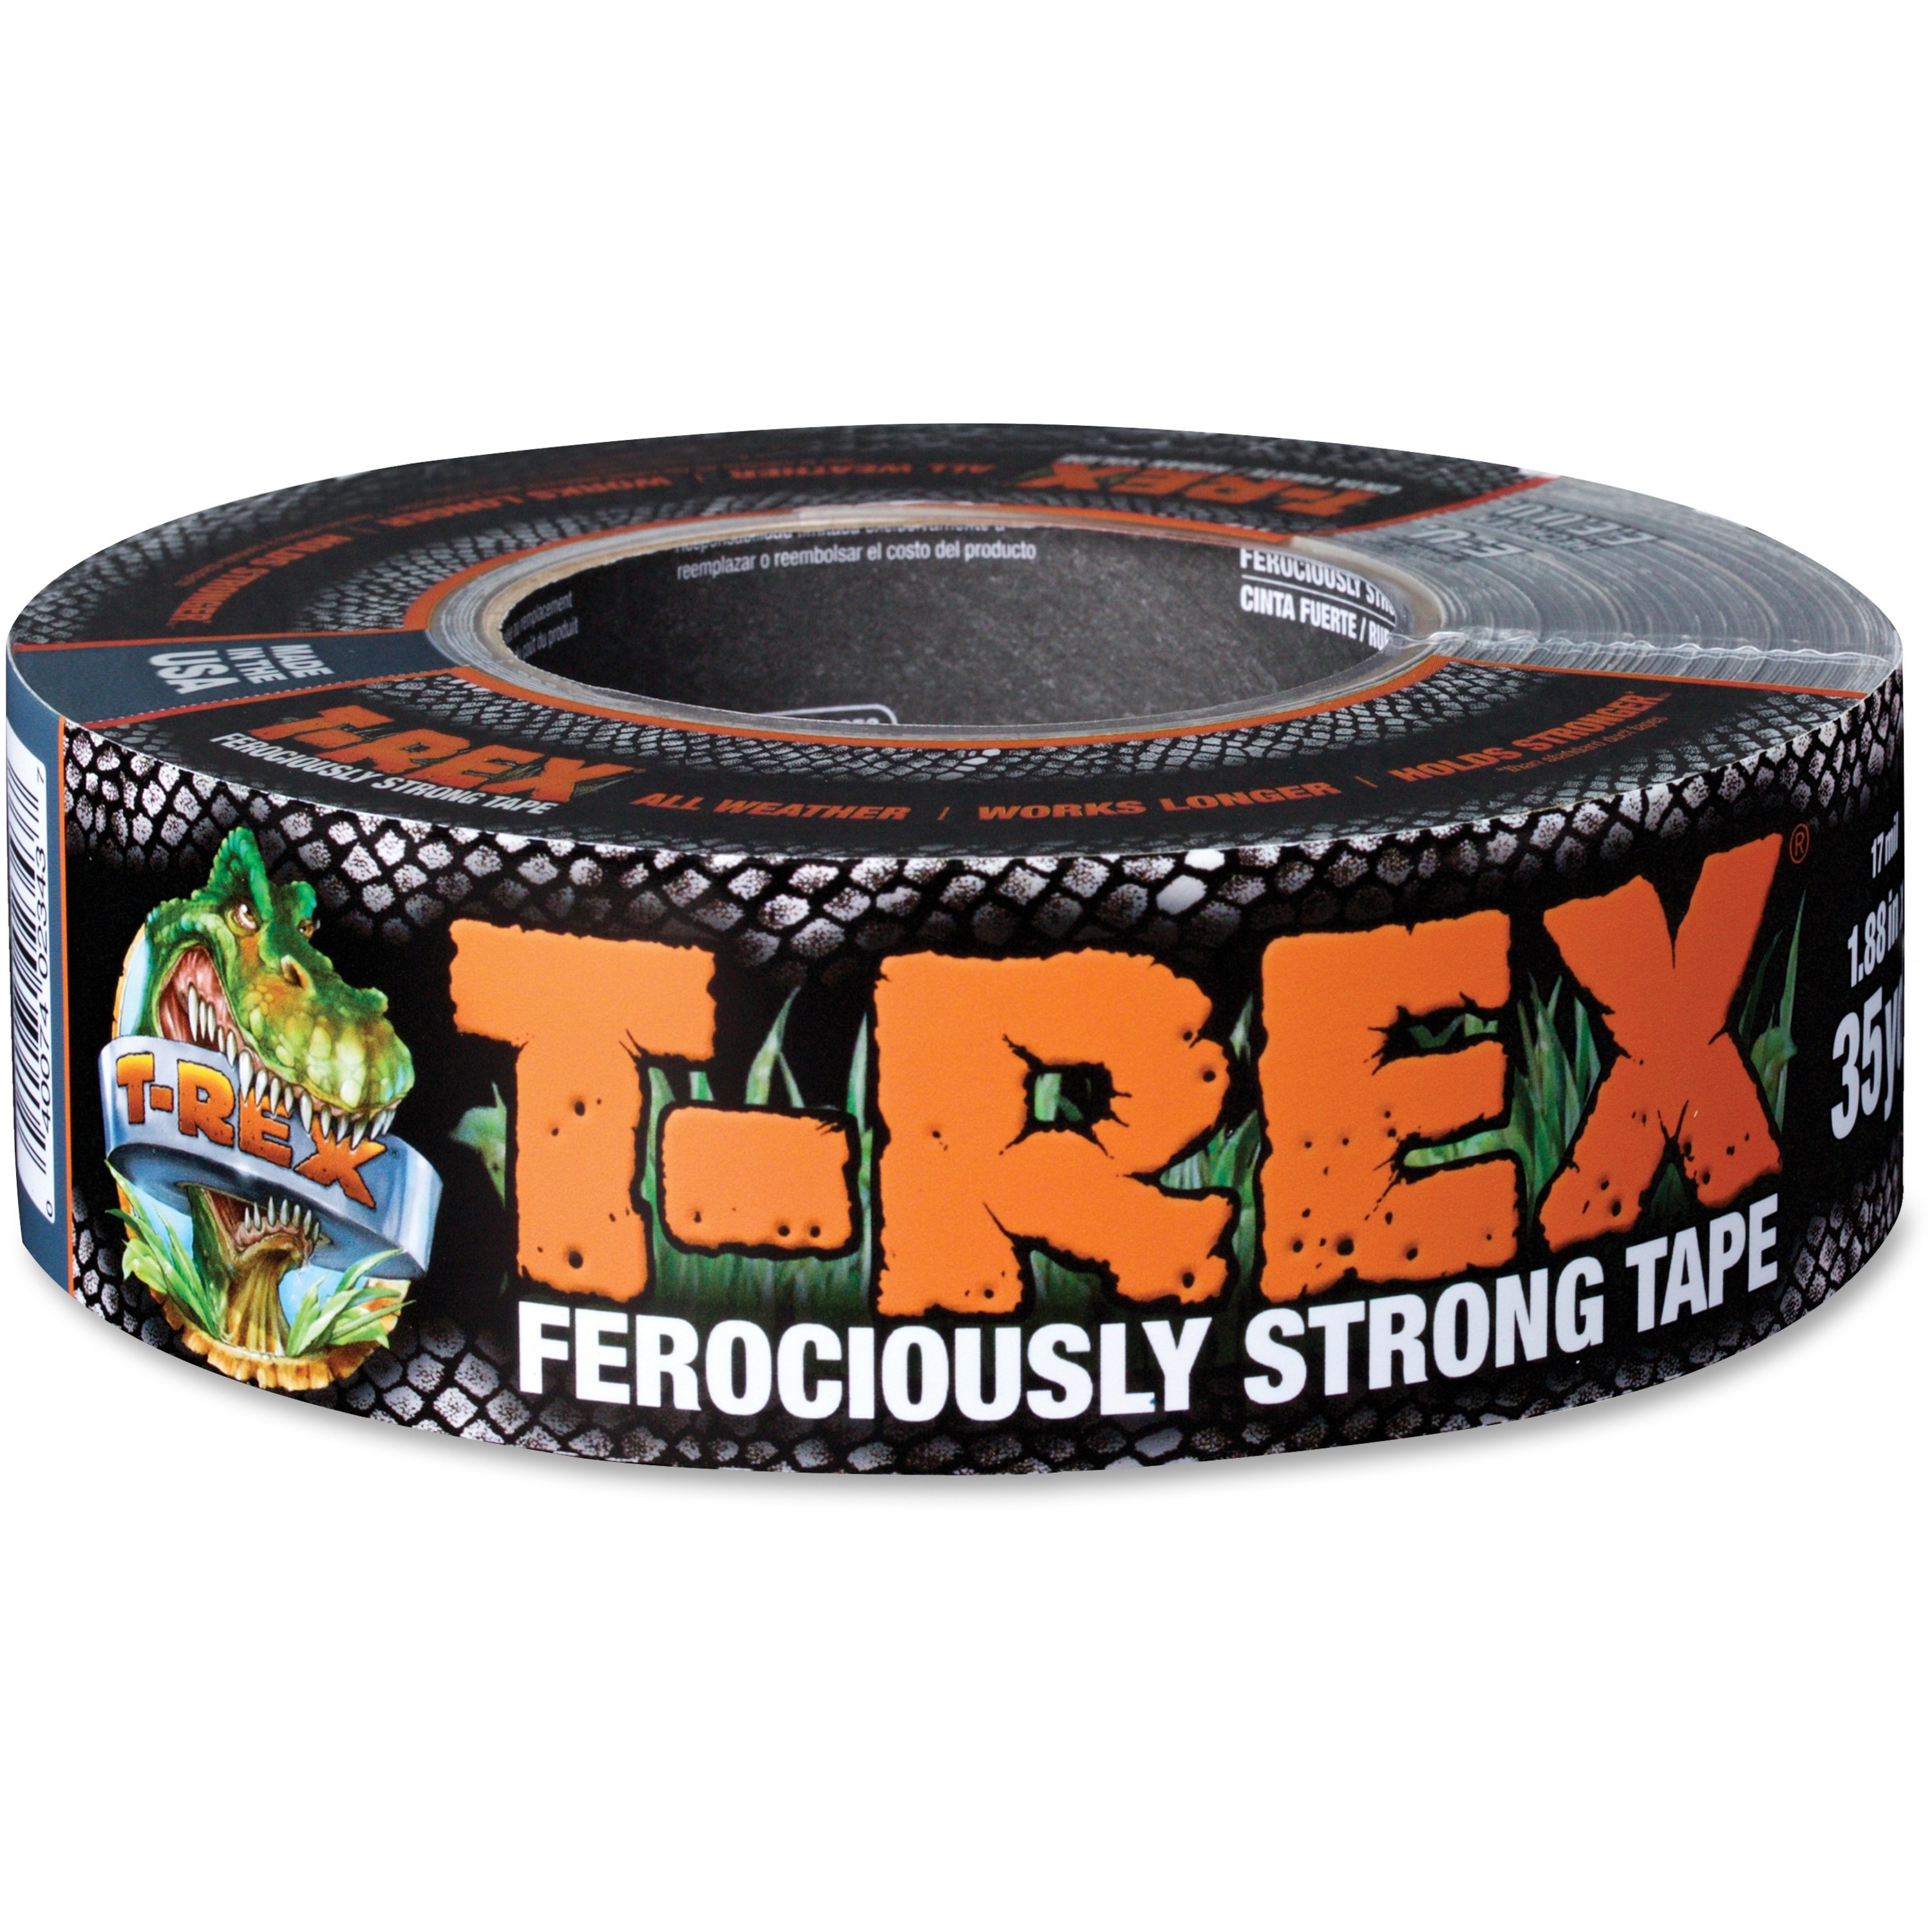 Duck Max Duct Tape, 1.88 x 35 yds, 3 Core, Black